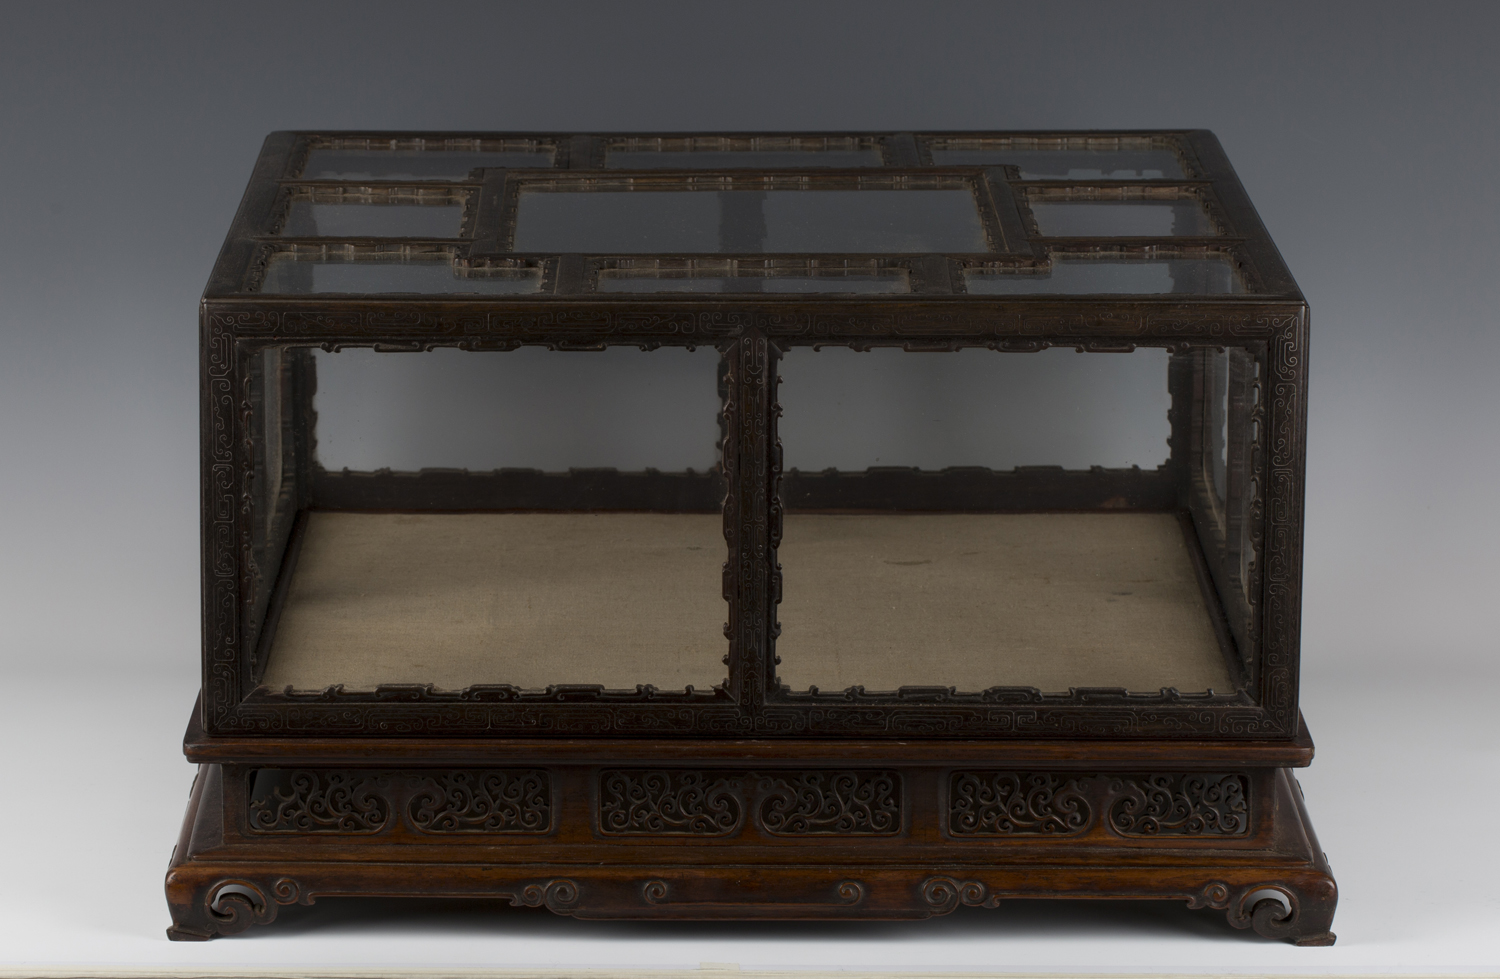 A Chinese silver wire inlaid hardwood and glazed table top display case and stand, late Qing